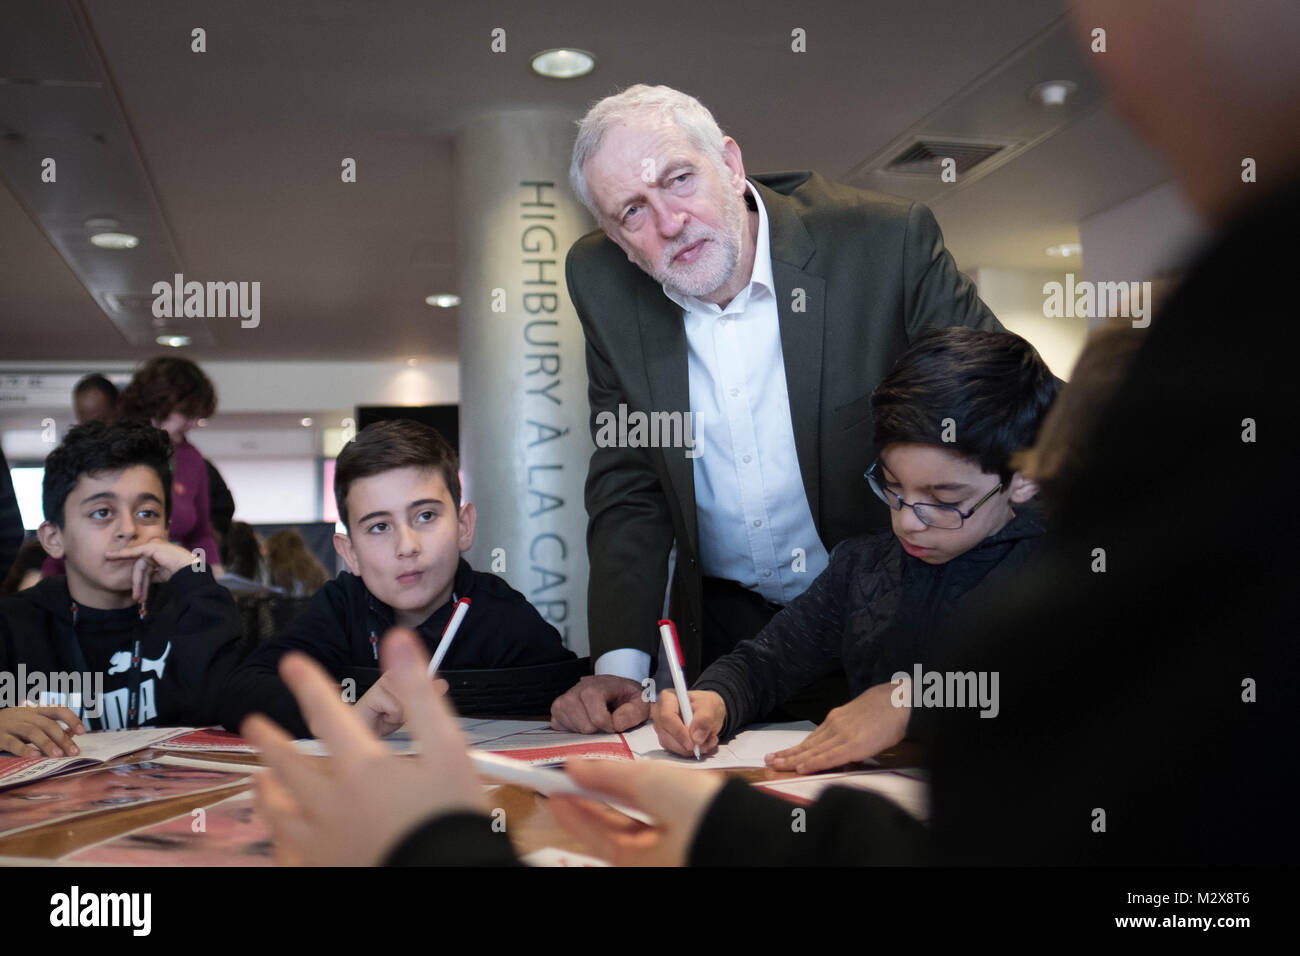 Labour leader Jeremy Corbyn joins school children at the Emirates Stadium in London where he spoke to the Show Racism the Red Card event to make children more aware of race issues and how to address them. Stock Photo